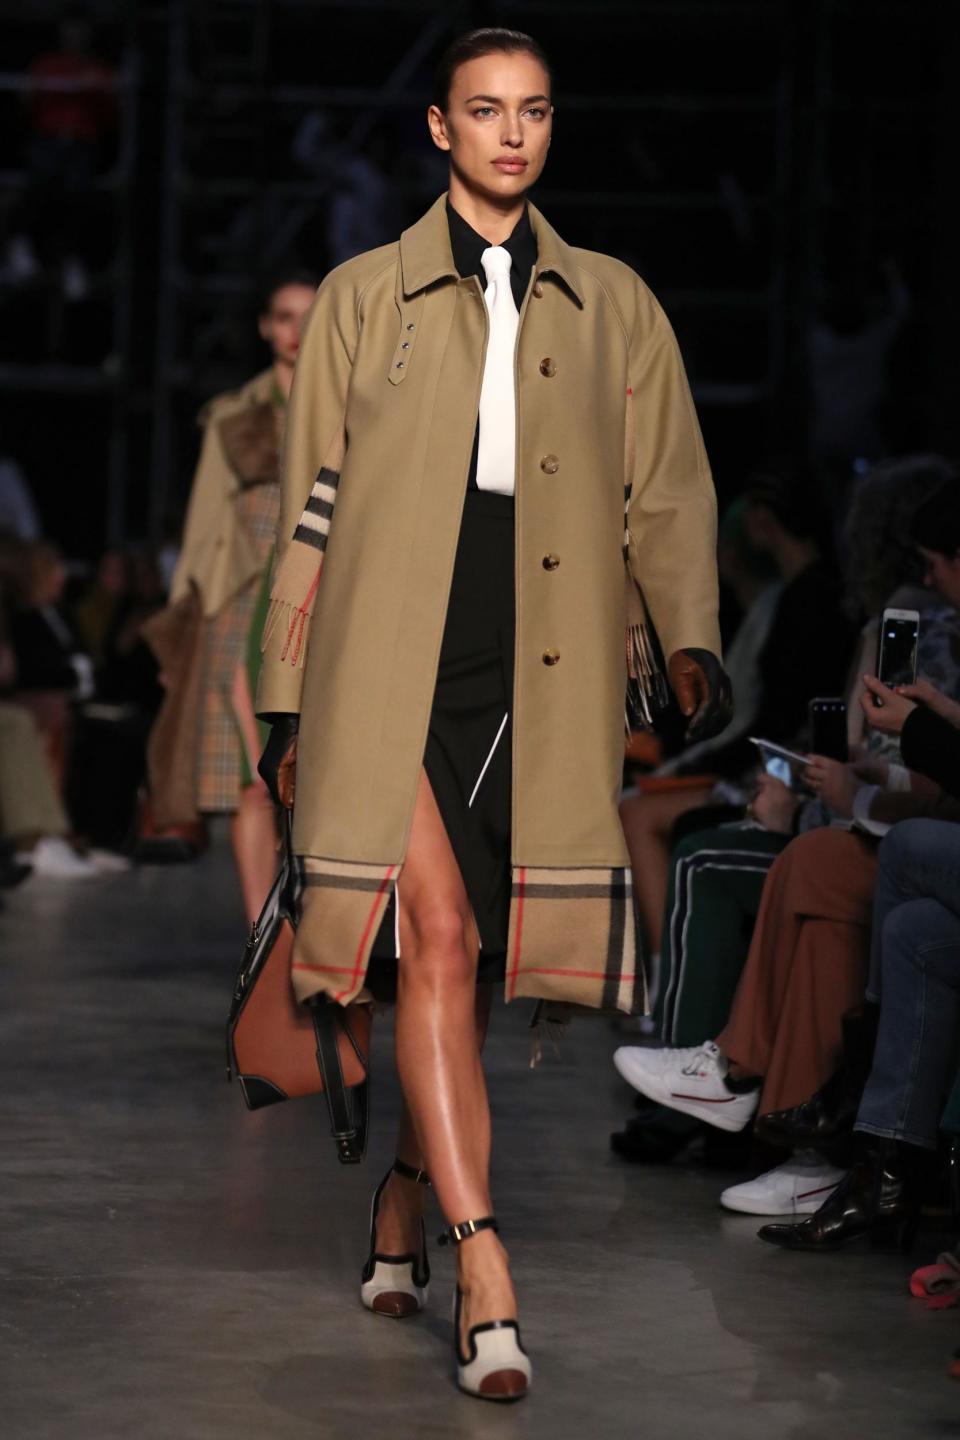 Irina Shayk once again took to the Burberry catwalk (AFP/Getty Images)